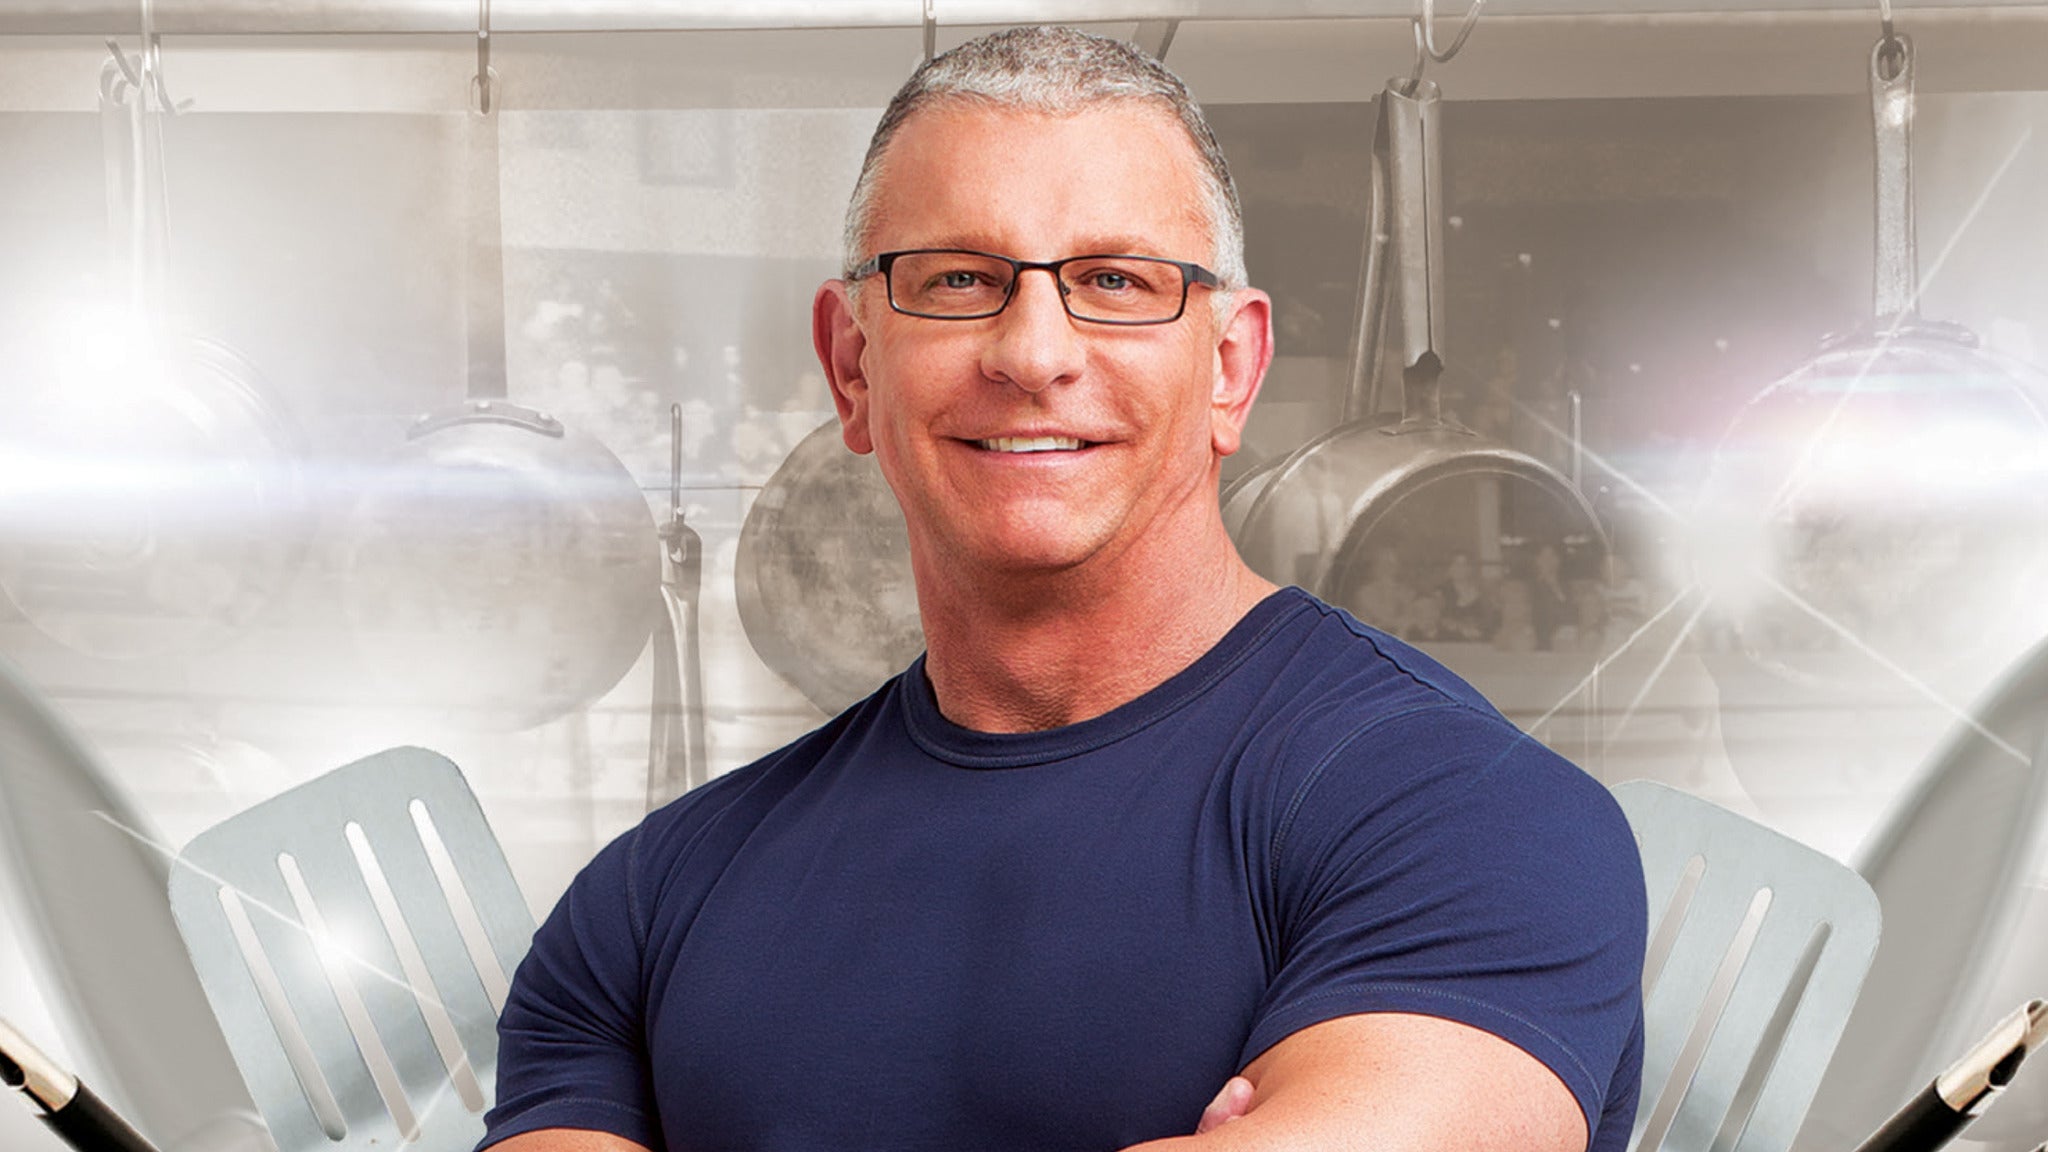 Chef Robert Irvine Live! in Charles Town promo photo for Mychoice Member presale offer code